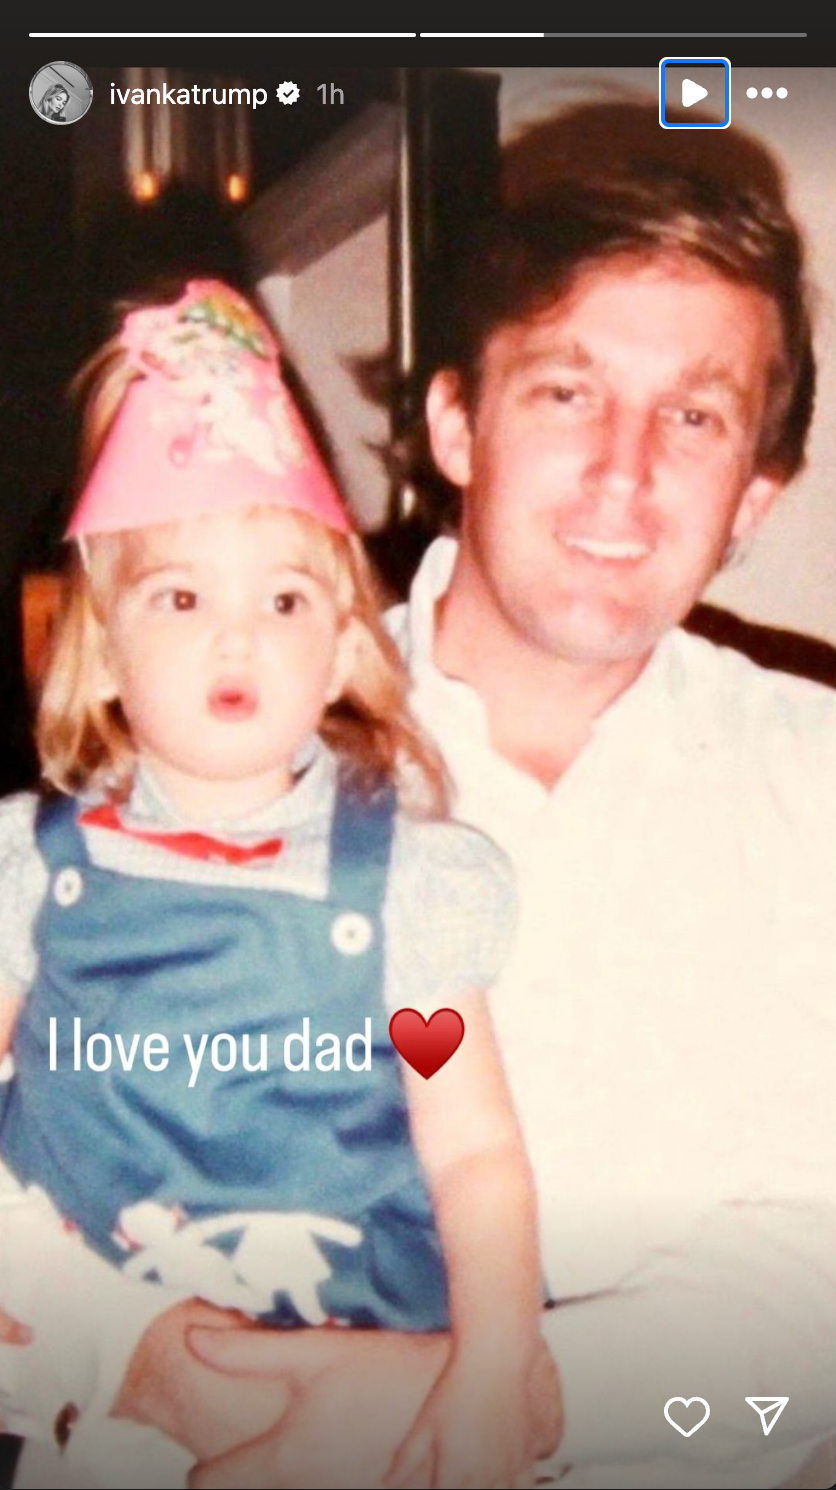 The former First Daughter, who also served as a special advisor during Trump’s time in office, posted a heartfelt message to her Instagram on Thursday